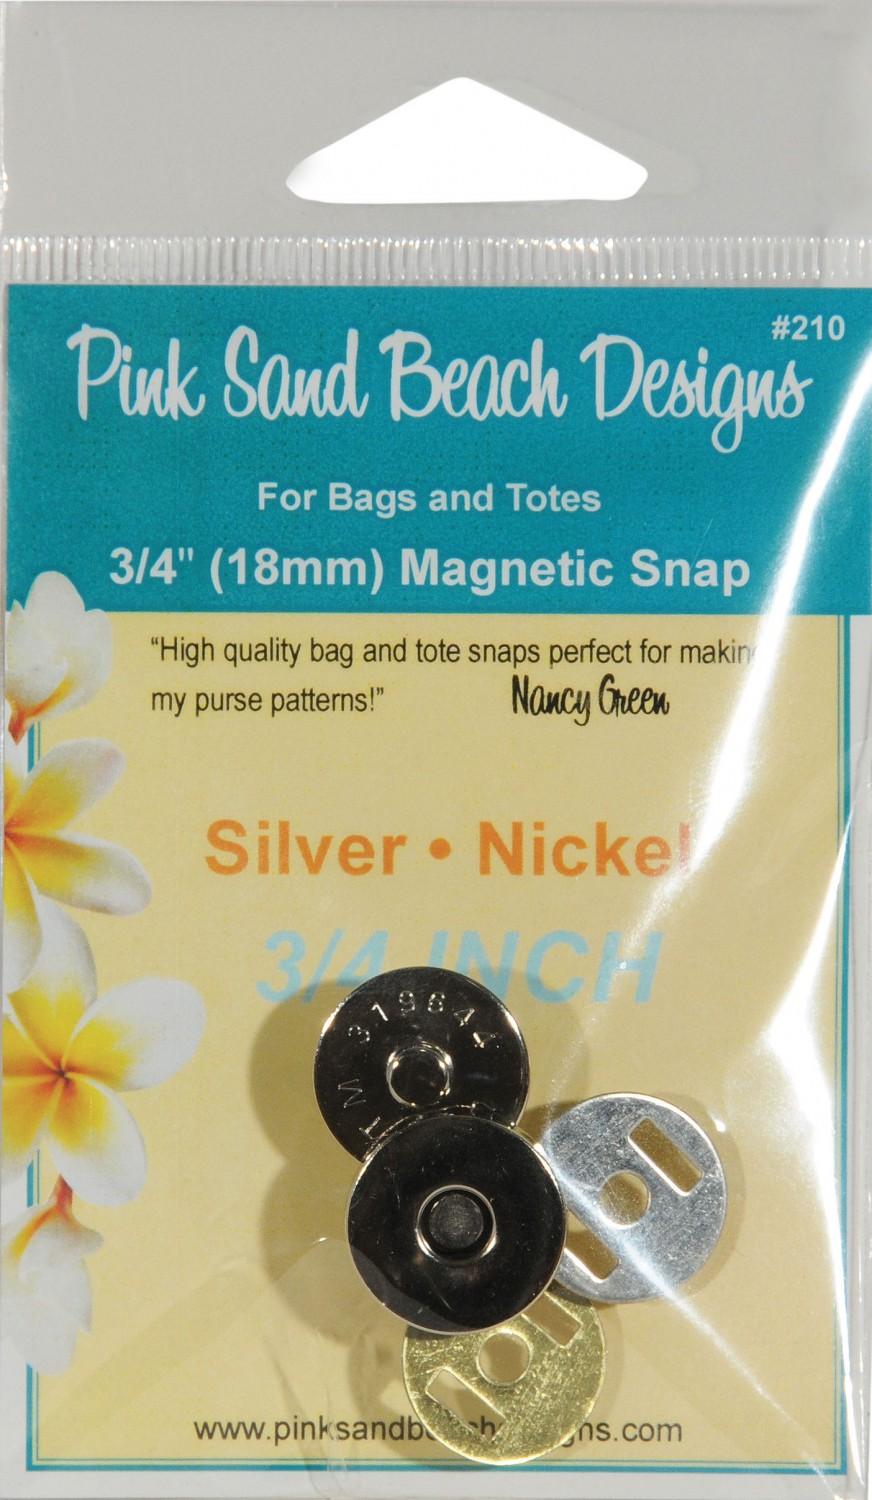 Magnetic Purse Snap - Silver Nickel 3/4in (18mm) # PSB210